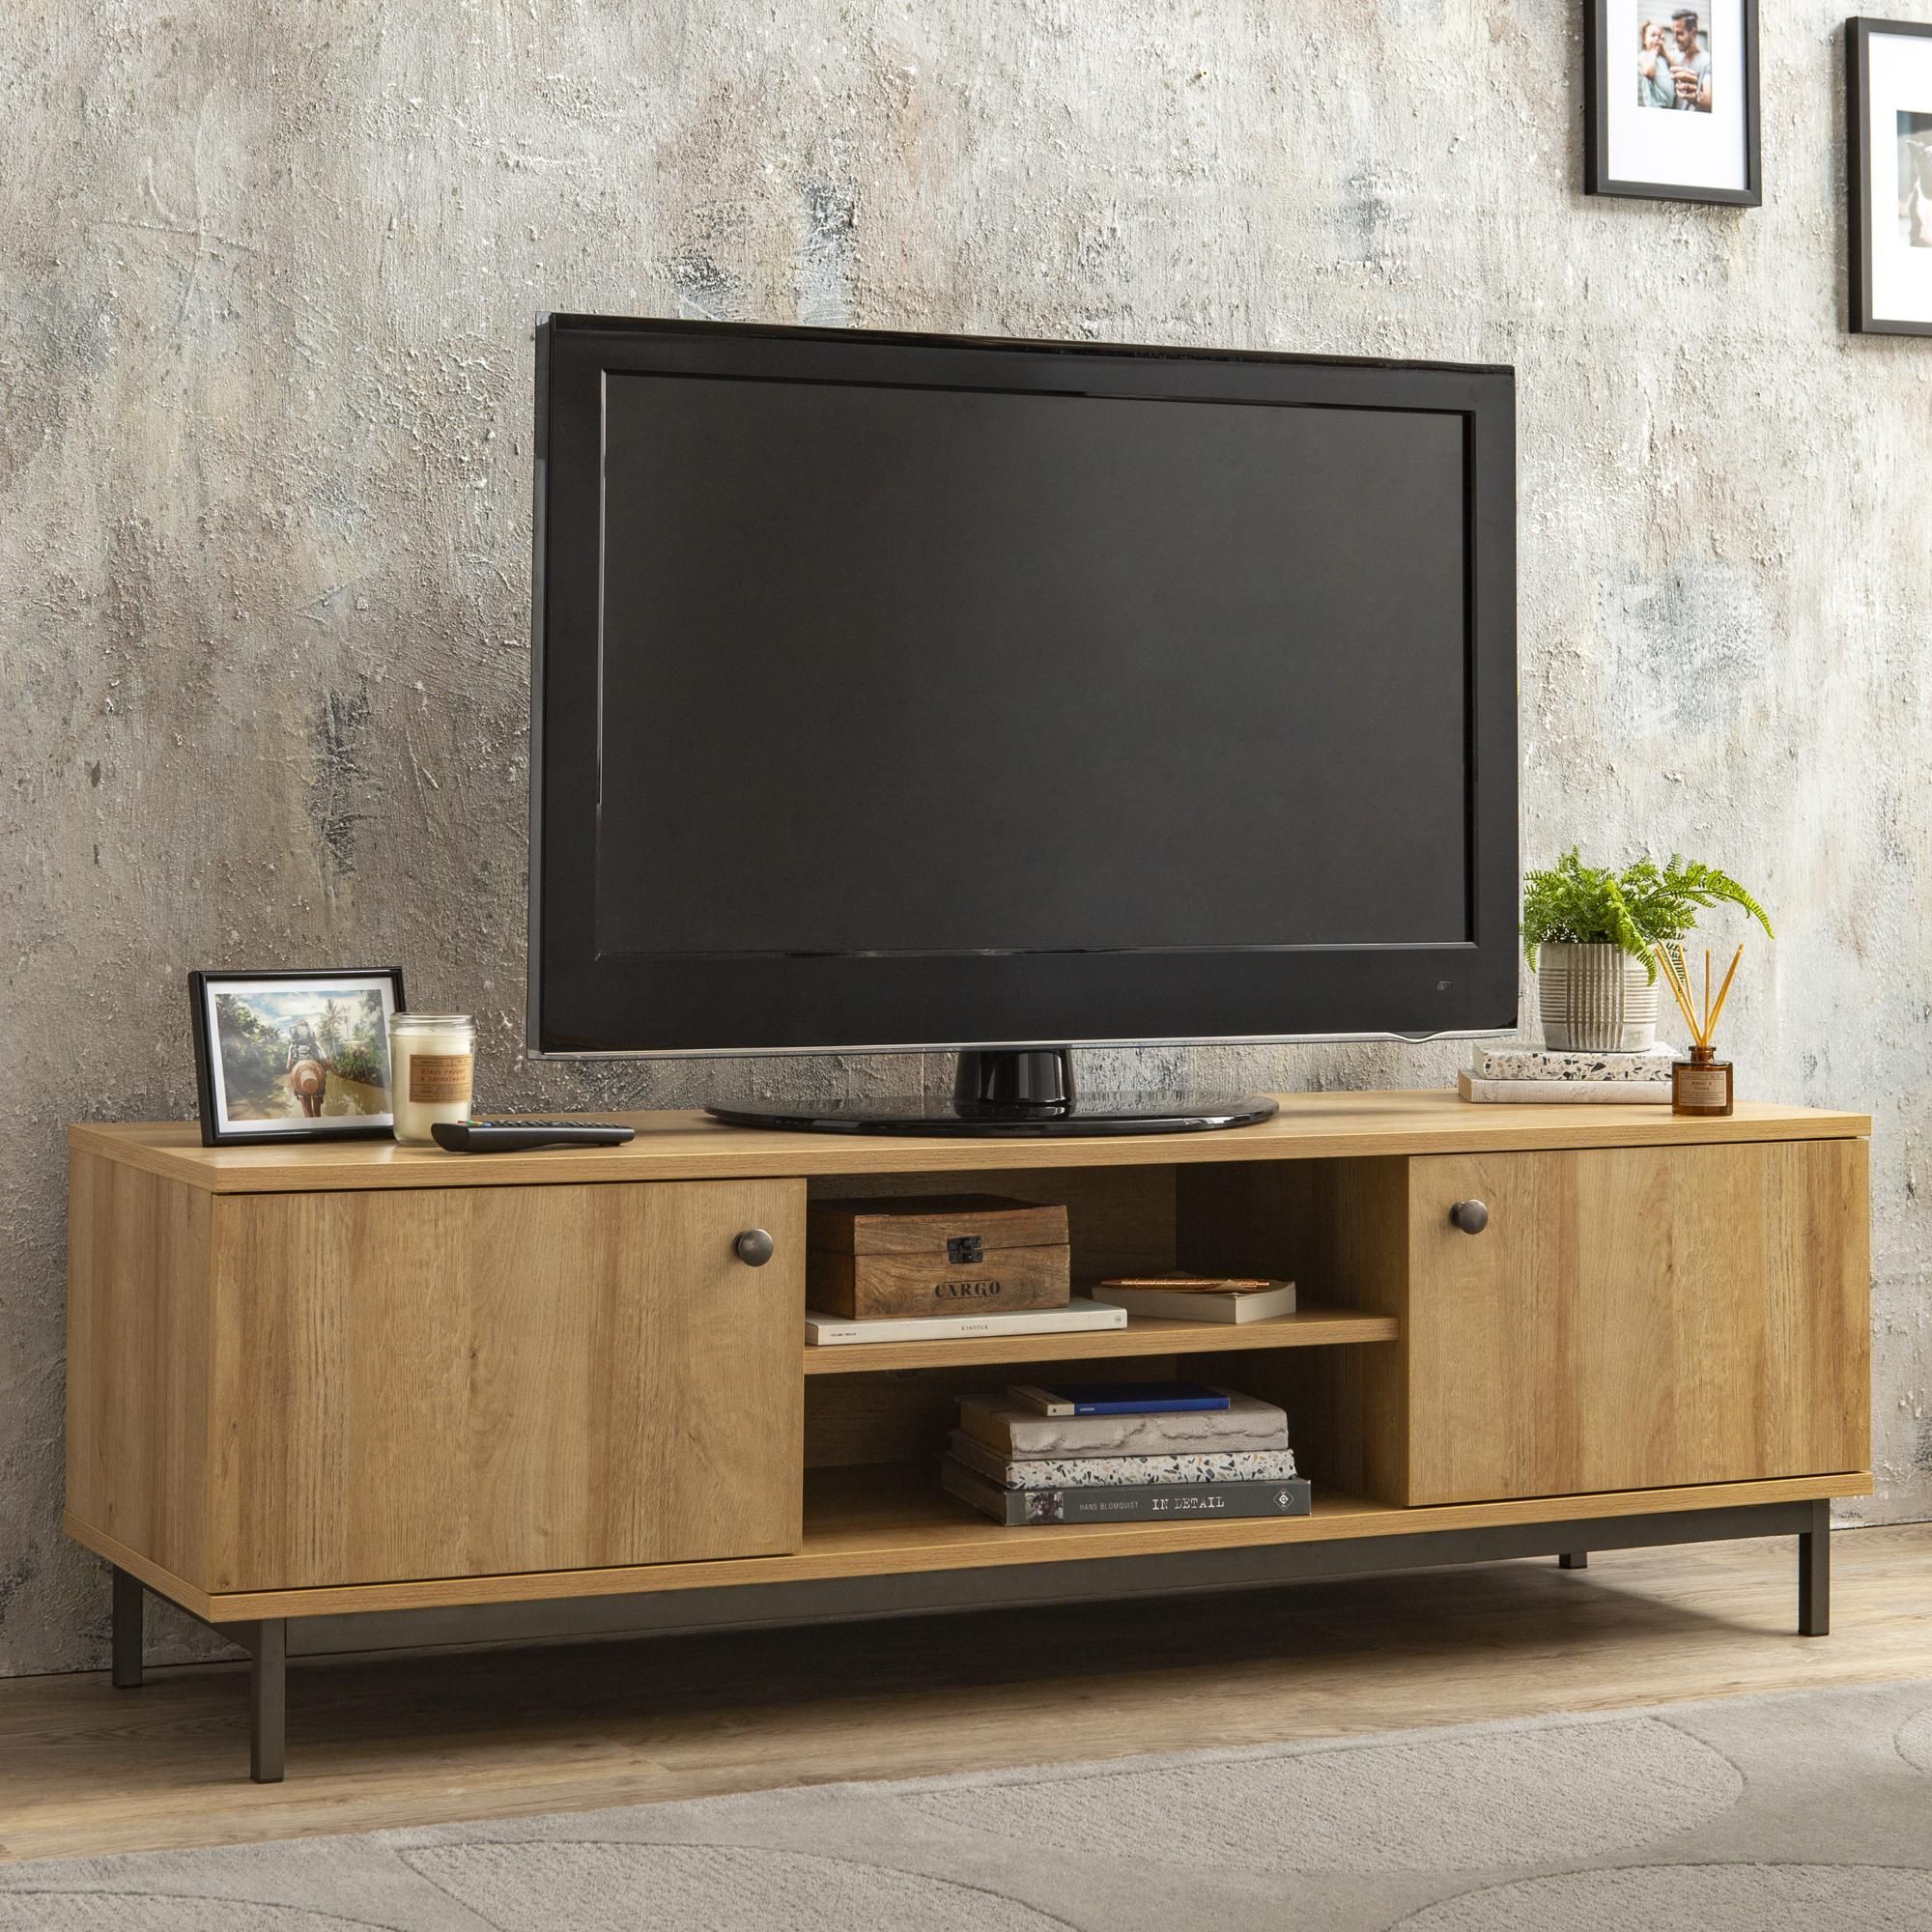 Fulton Oak Effect Wide Tv Stand In 2021 | Living Room Tv Regarding Fulton Tv Stands (View 9 of 15)